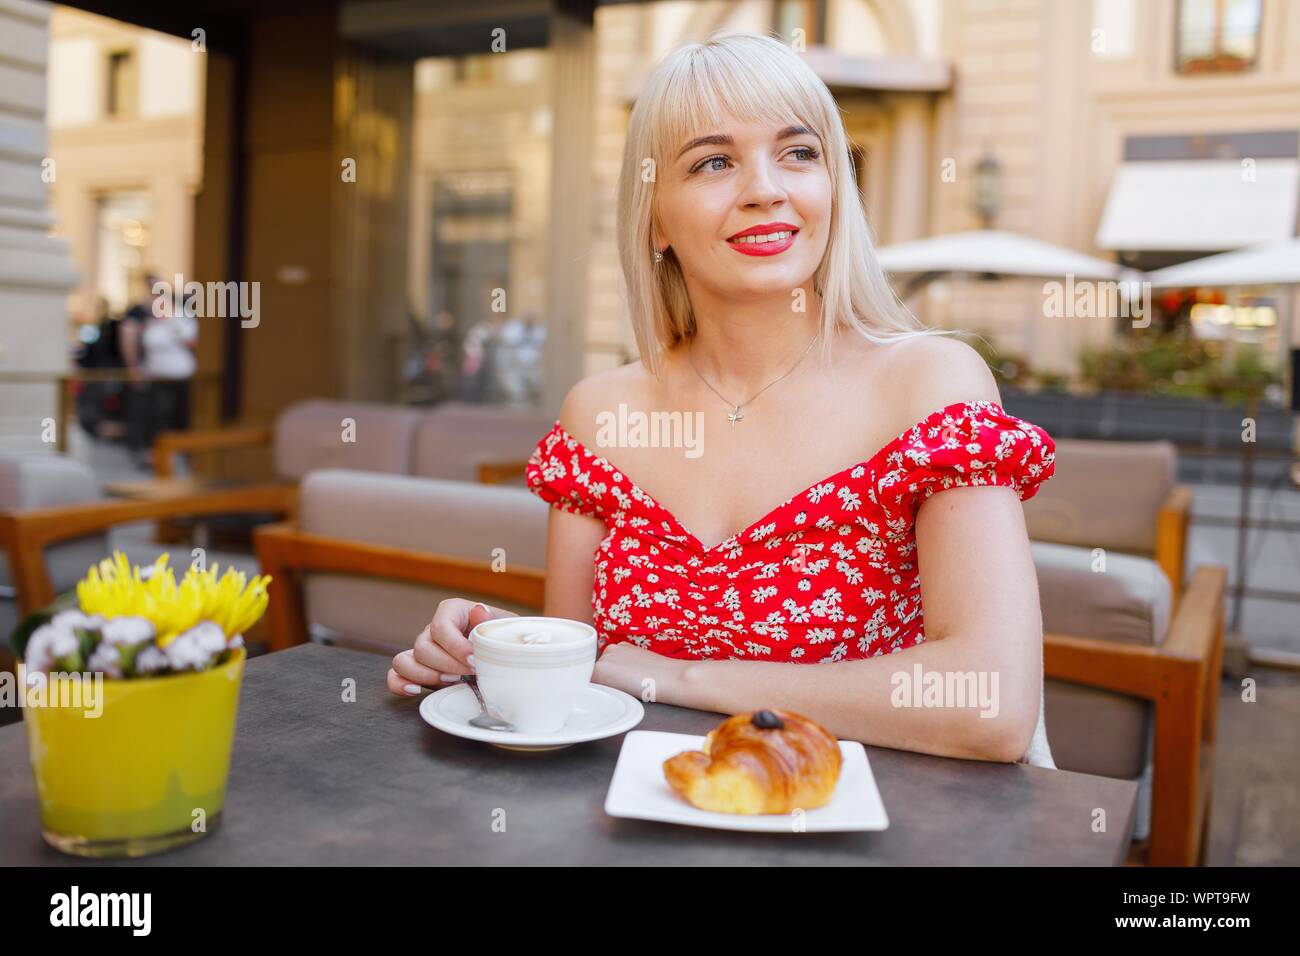 Young woman having italian breakfast with croissant and coffee a Stock Photo